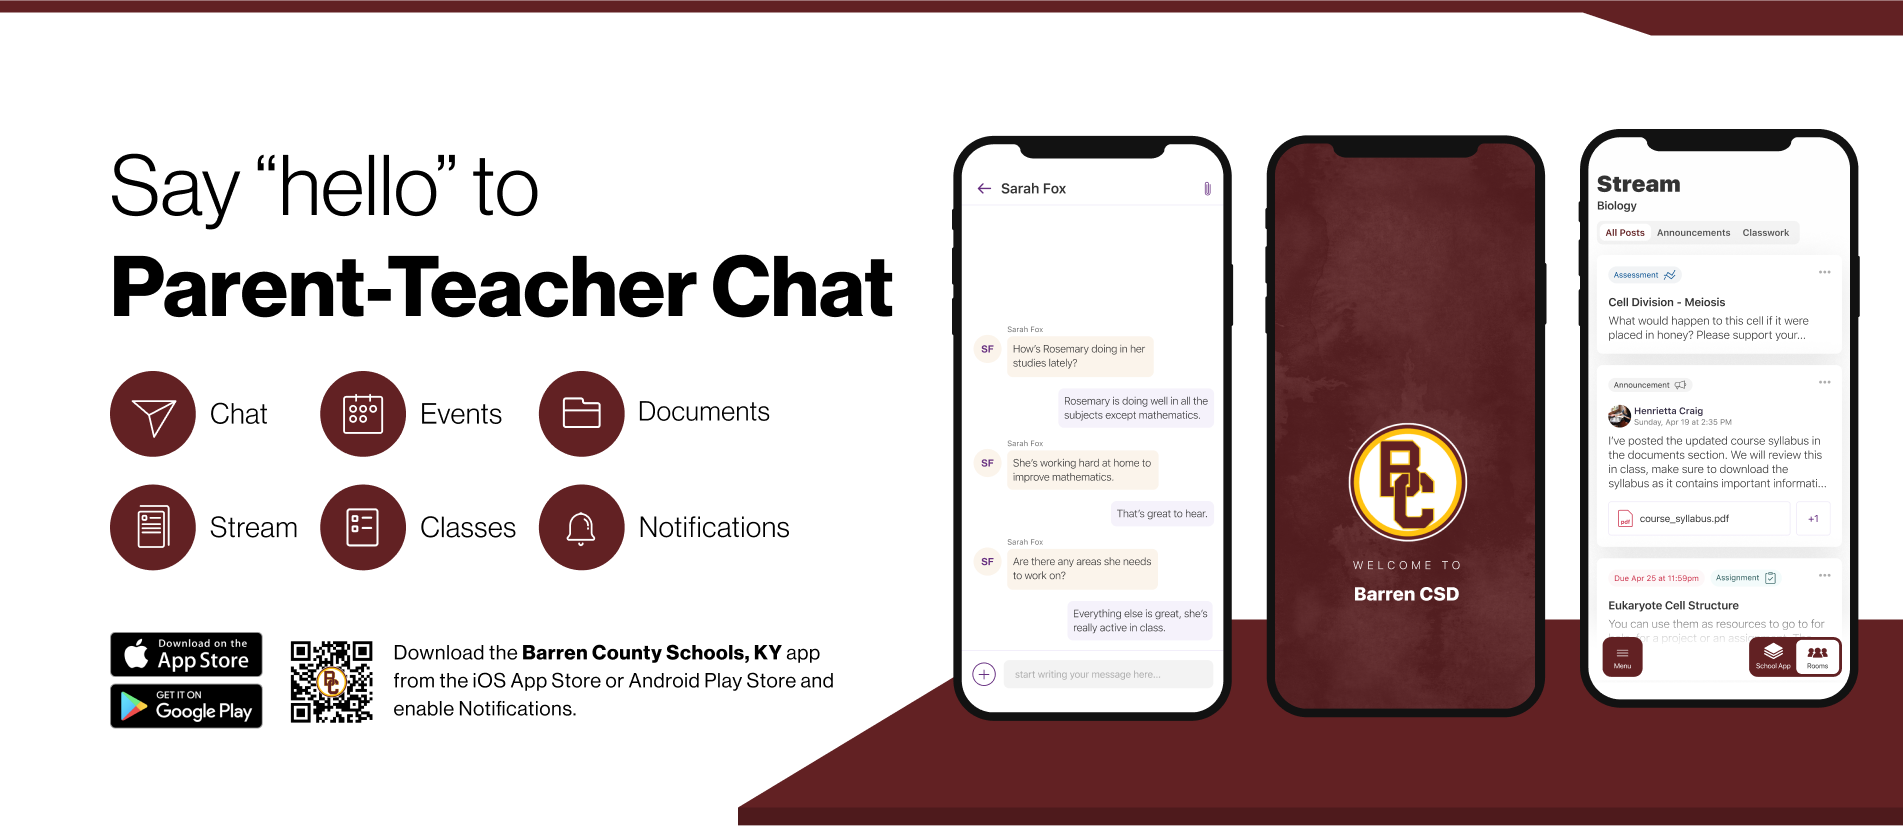 Say hello to parent-teacher chat